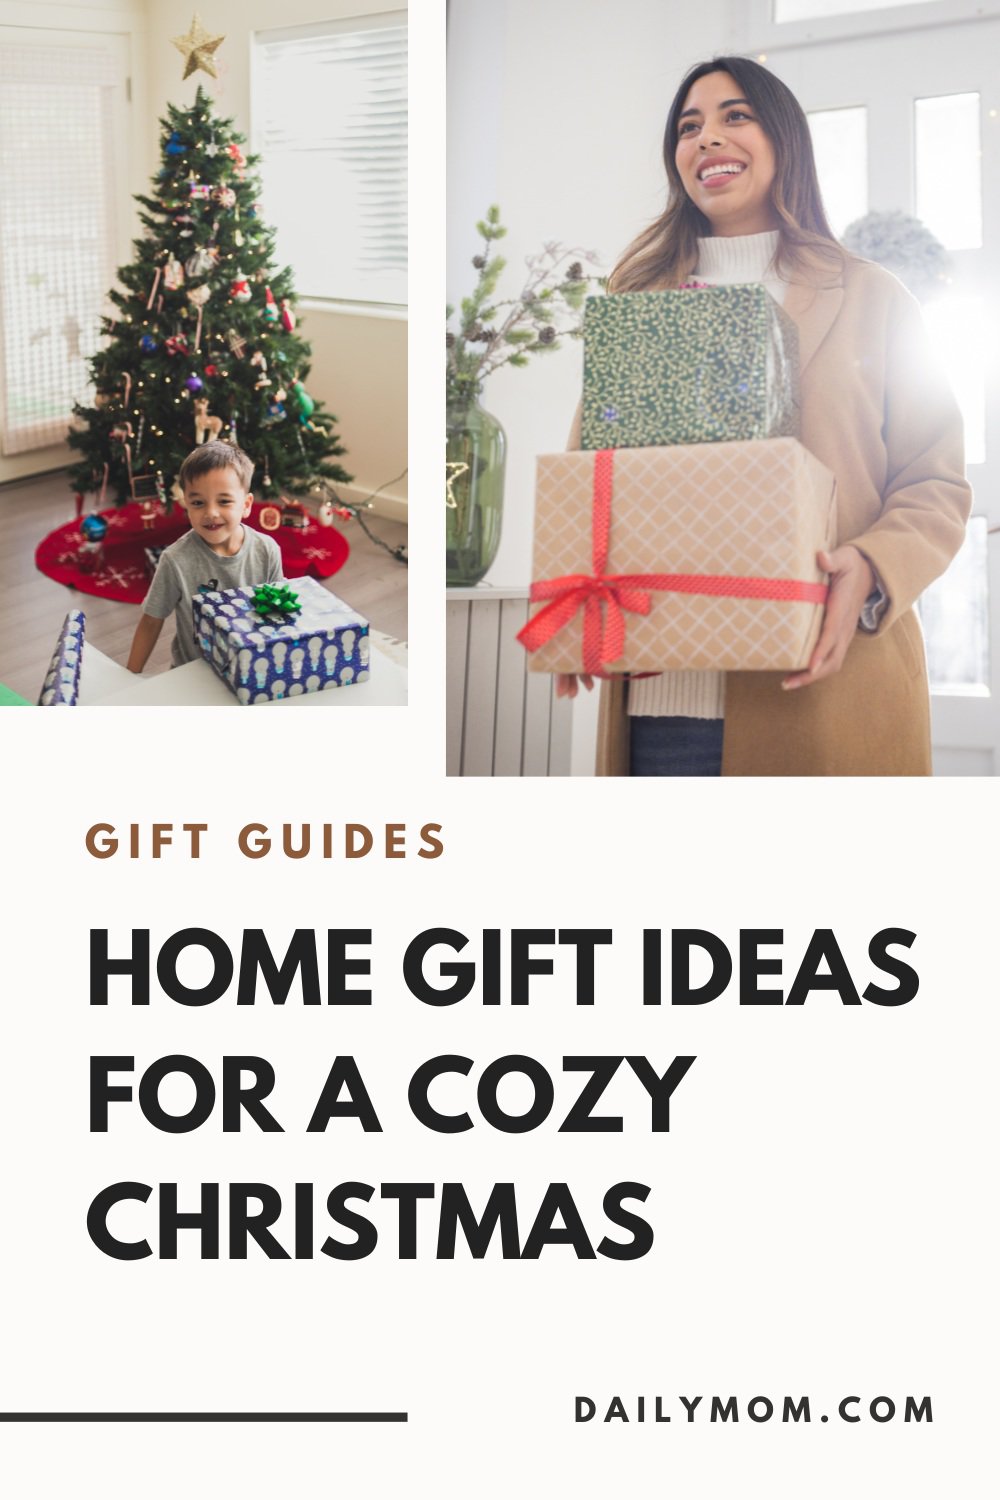 27 Home Gift Ideas For A Cozy Christmas 78 Daily Mom, Magazine For Families